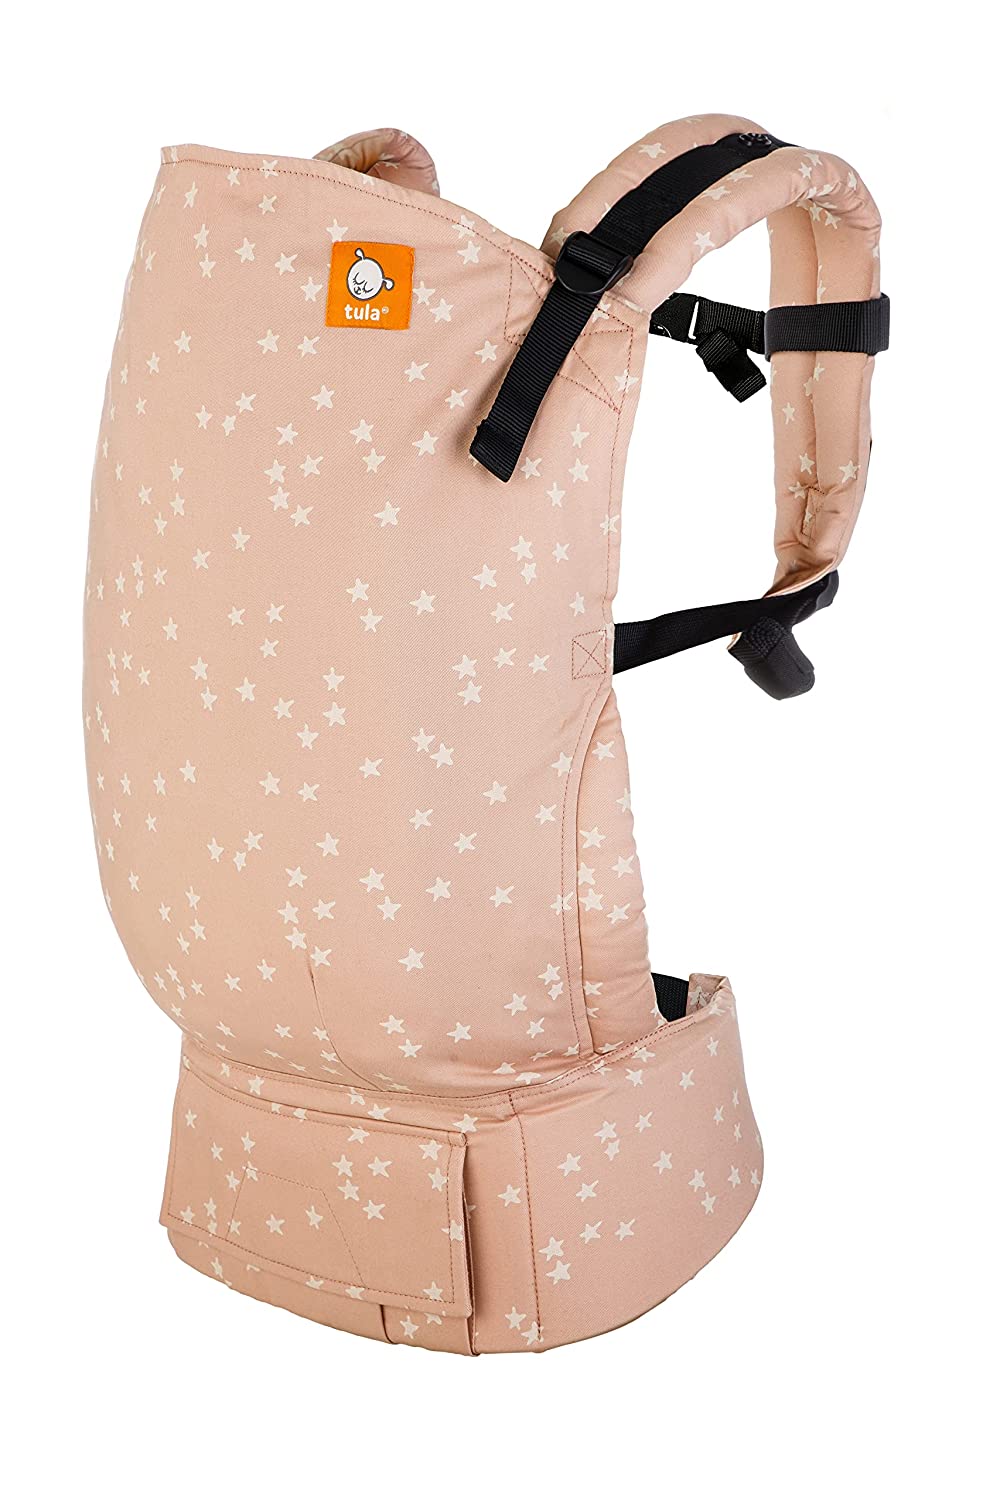 Tula Toddler Stardust Ergonomic Baby Carrier Adjustable from 11 to 27 kg with Extra Leg Padding